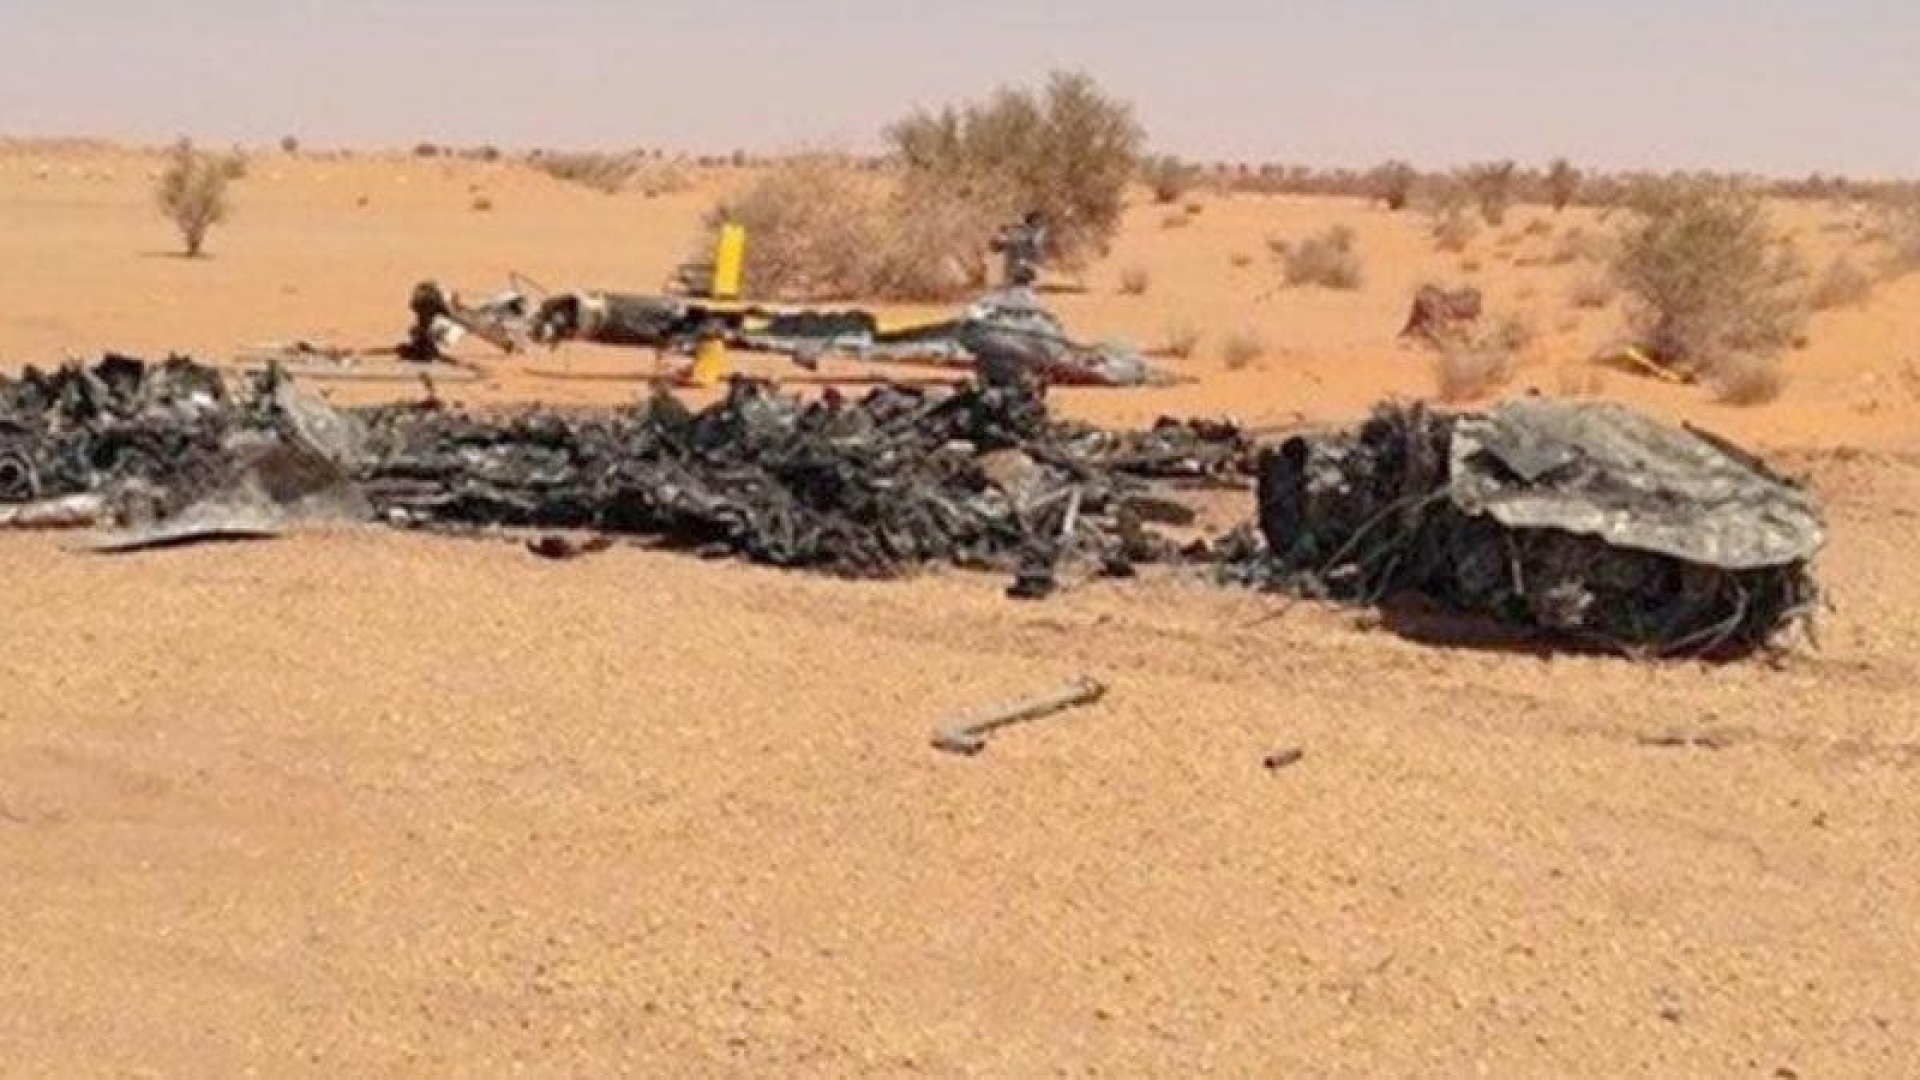 LNA General tells how a helicopter burnt in the Libyan Al Jufra municipality